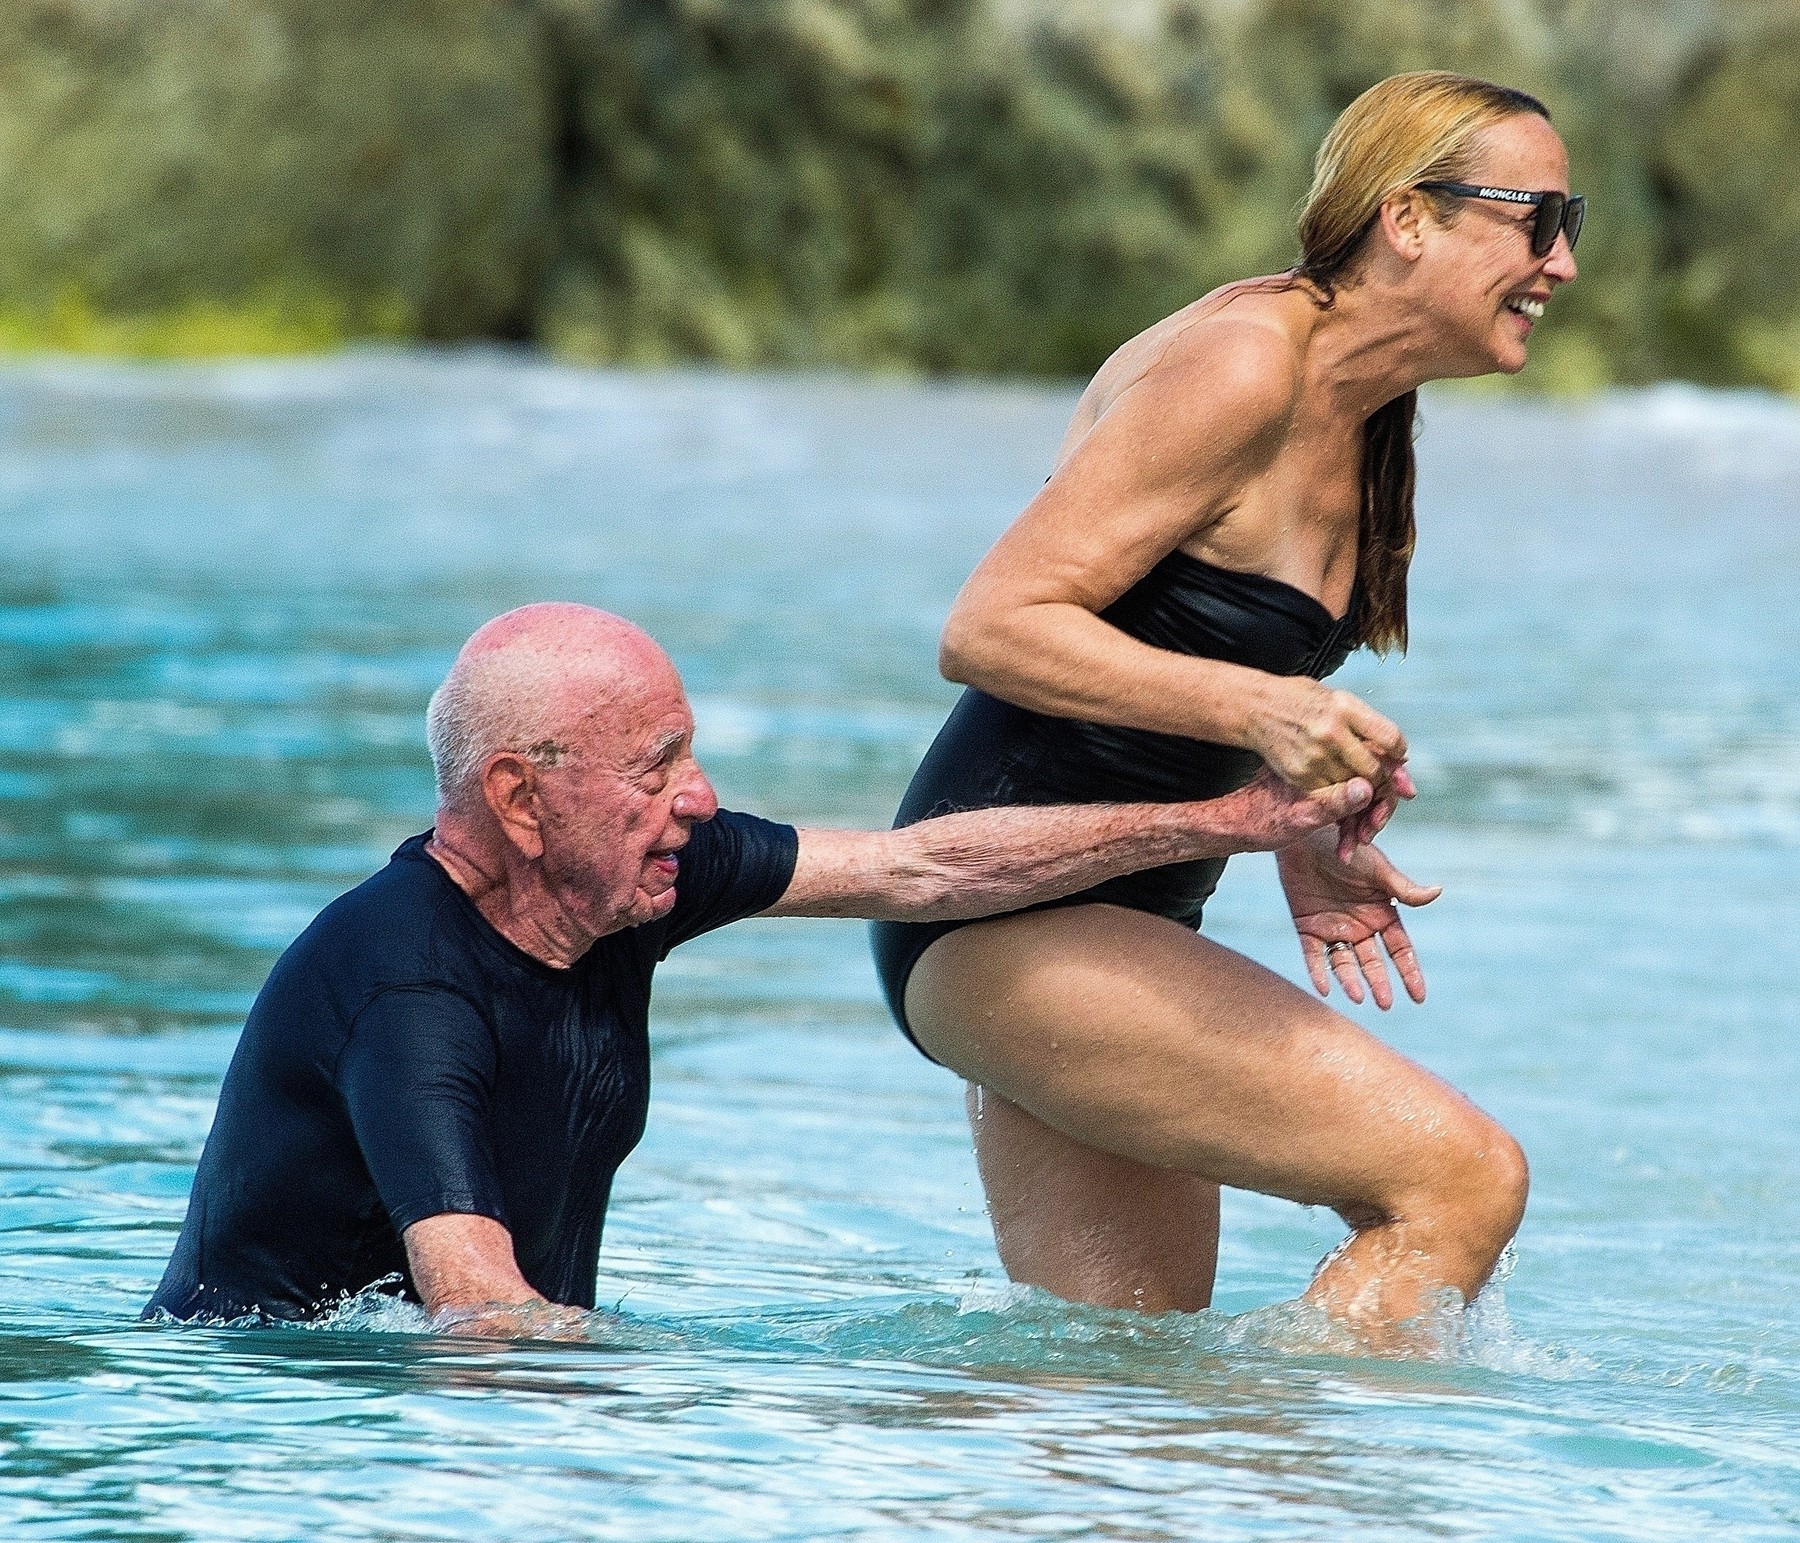 BRIDGETOWN, BARBADOS  - *PREMIUM-EXCLUSIVE*  - MUST CALL FOR PRICING BEFORE USAGE  - 

She was once the most photographed models of her hay day, Jerry Hall now 63-year old still looks incredible in her black swimsuit as she frolics in the sea with husband Rupert Murdoch, 88, out on holiday in Barbados.

With both enjoying a little affection by giving each other a little kiss, The American media mogul Murdoch struggled to stay on his feet trying to fight the currents of the sea and needed a helping hand from wife Jerry with both in a joyful mood as Jerry herself took a tumble during the process. 

The couple eventually made their way out of the sea and back onto the beach where they then sat and relaxed with their reading material after Rupert applied some more sunscreen to protect him from the scorching Caribbean sun!

*UK Clients - Pictures Containing Children
Please Pixelate Face Prior To Publication*, Image: 491303704, License: Rights-managed, Restrictions: RIGHTS: WORLDWIDE EXCEPT IN ITALY, Model Release: no, Credit line: BACKGRID / Backgrid UK / Profimedia